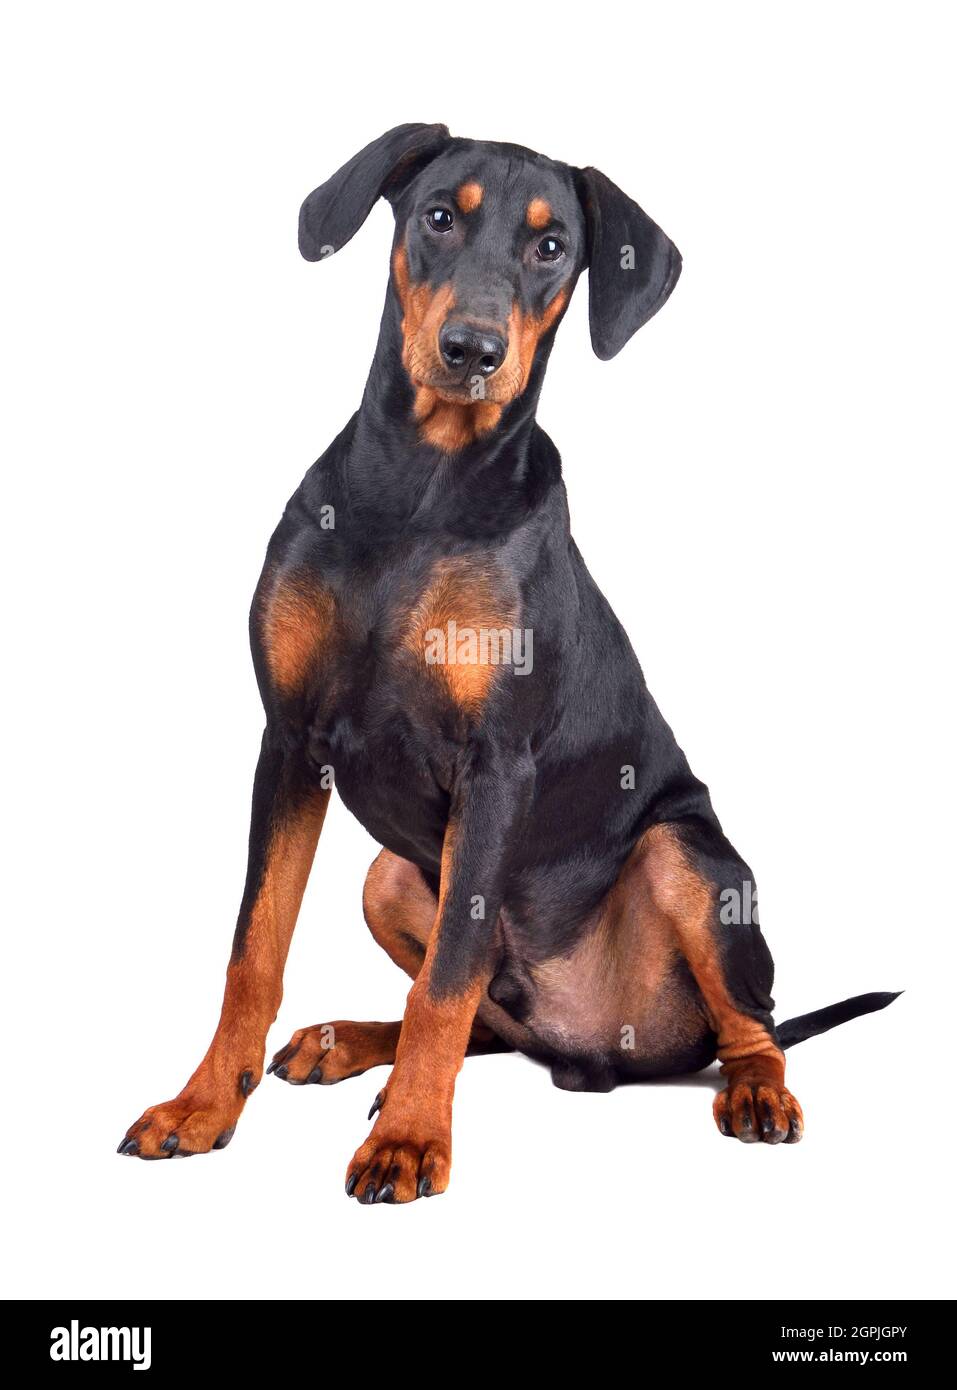 Sitting puppy of tan-and-black German Pinscher or Doberman Pinscher isolated on a white background Stock Photo